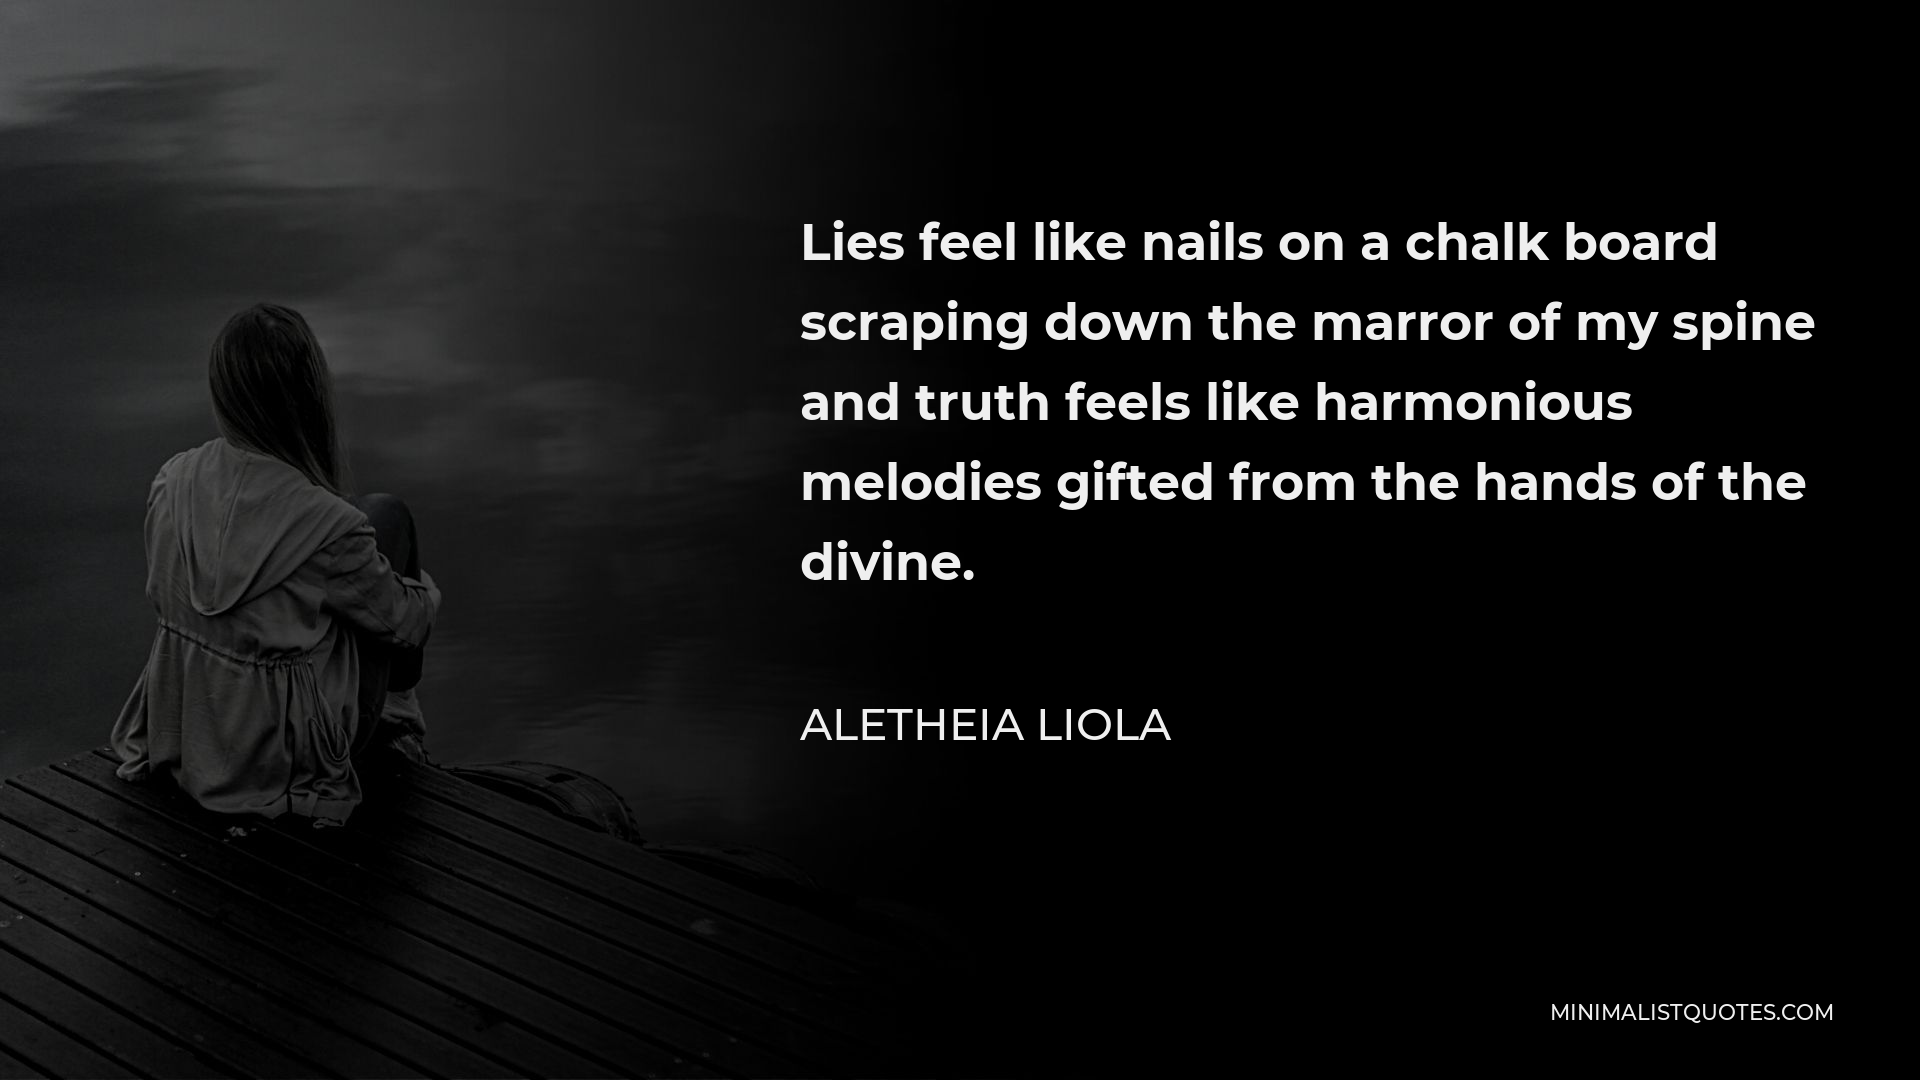 Aletheia Liola Quote - Lies feel like nails on a chalk board scraping down the marror of my spine and truth feels like harmonious melodies gifted from the hands of the divine.